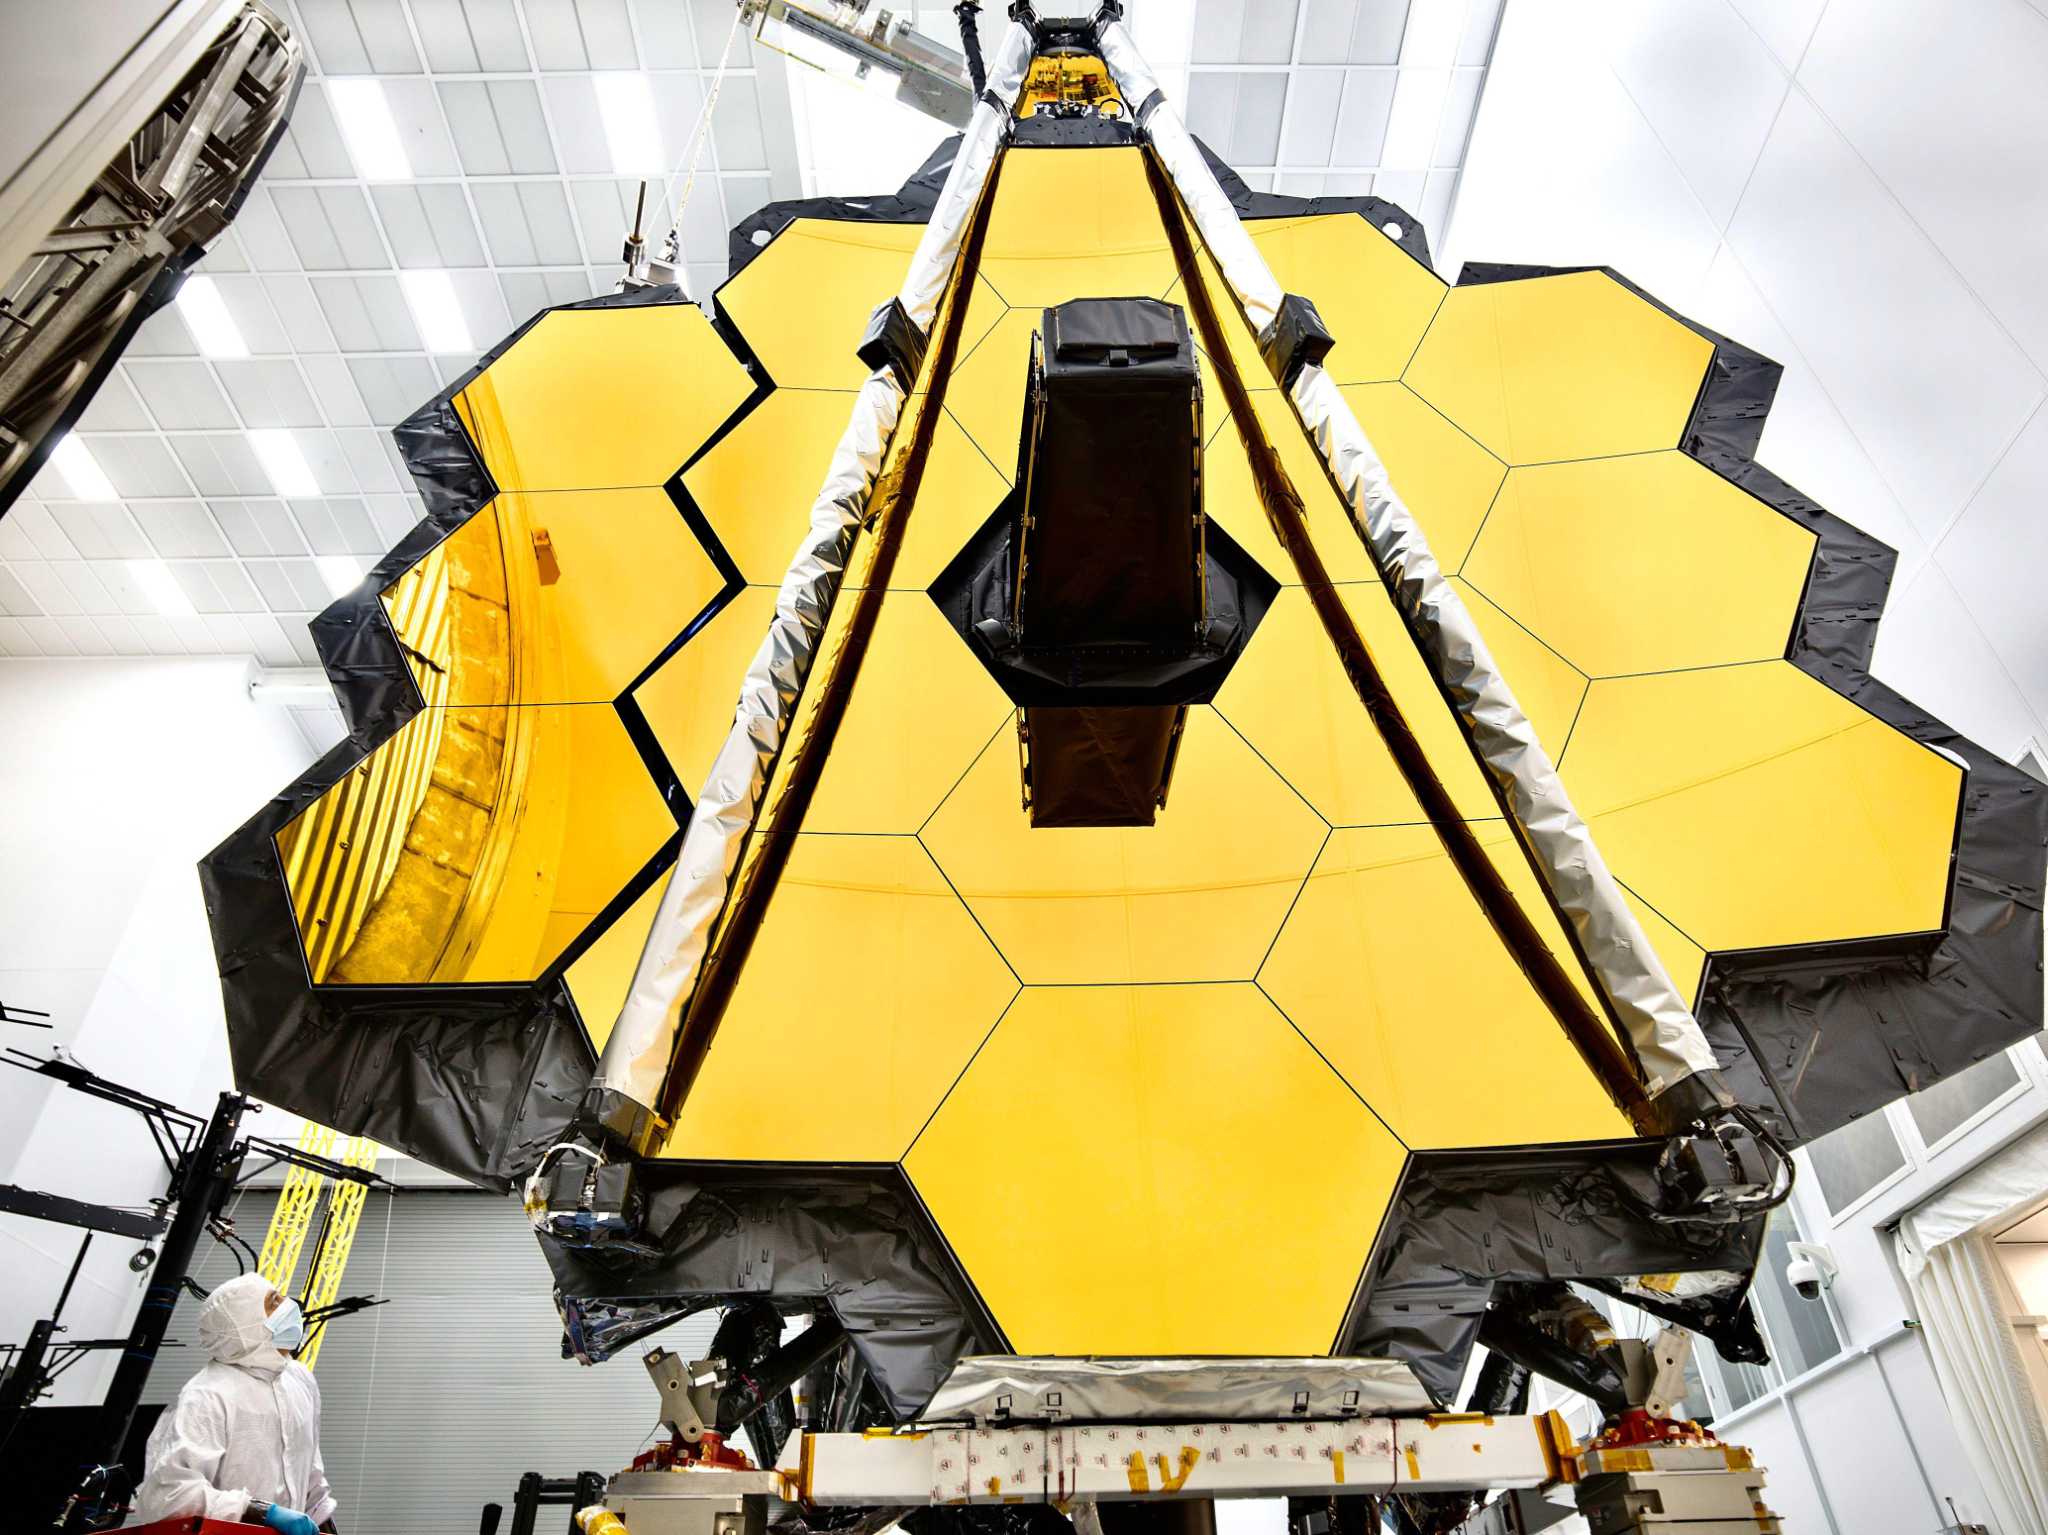 NASA's $10 billion James Webb Telescope permanently damaged after being hit by micrometeoroid: Report